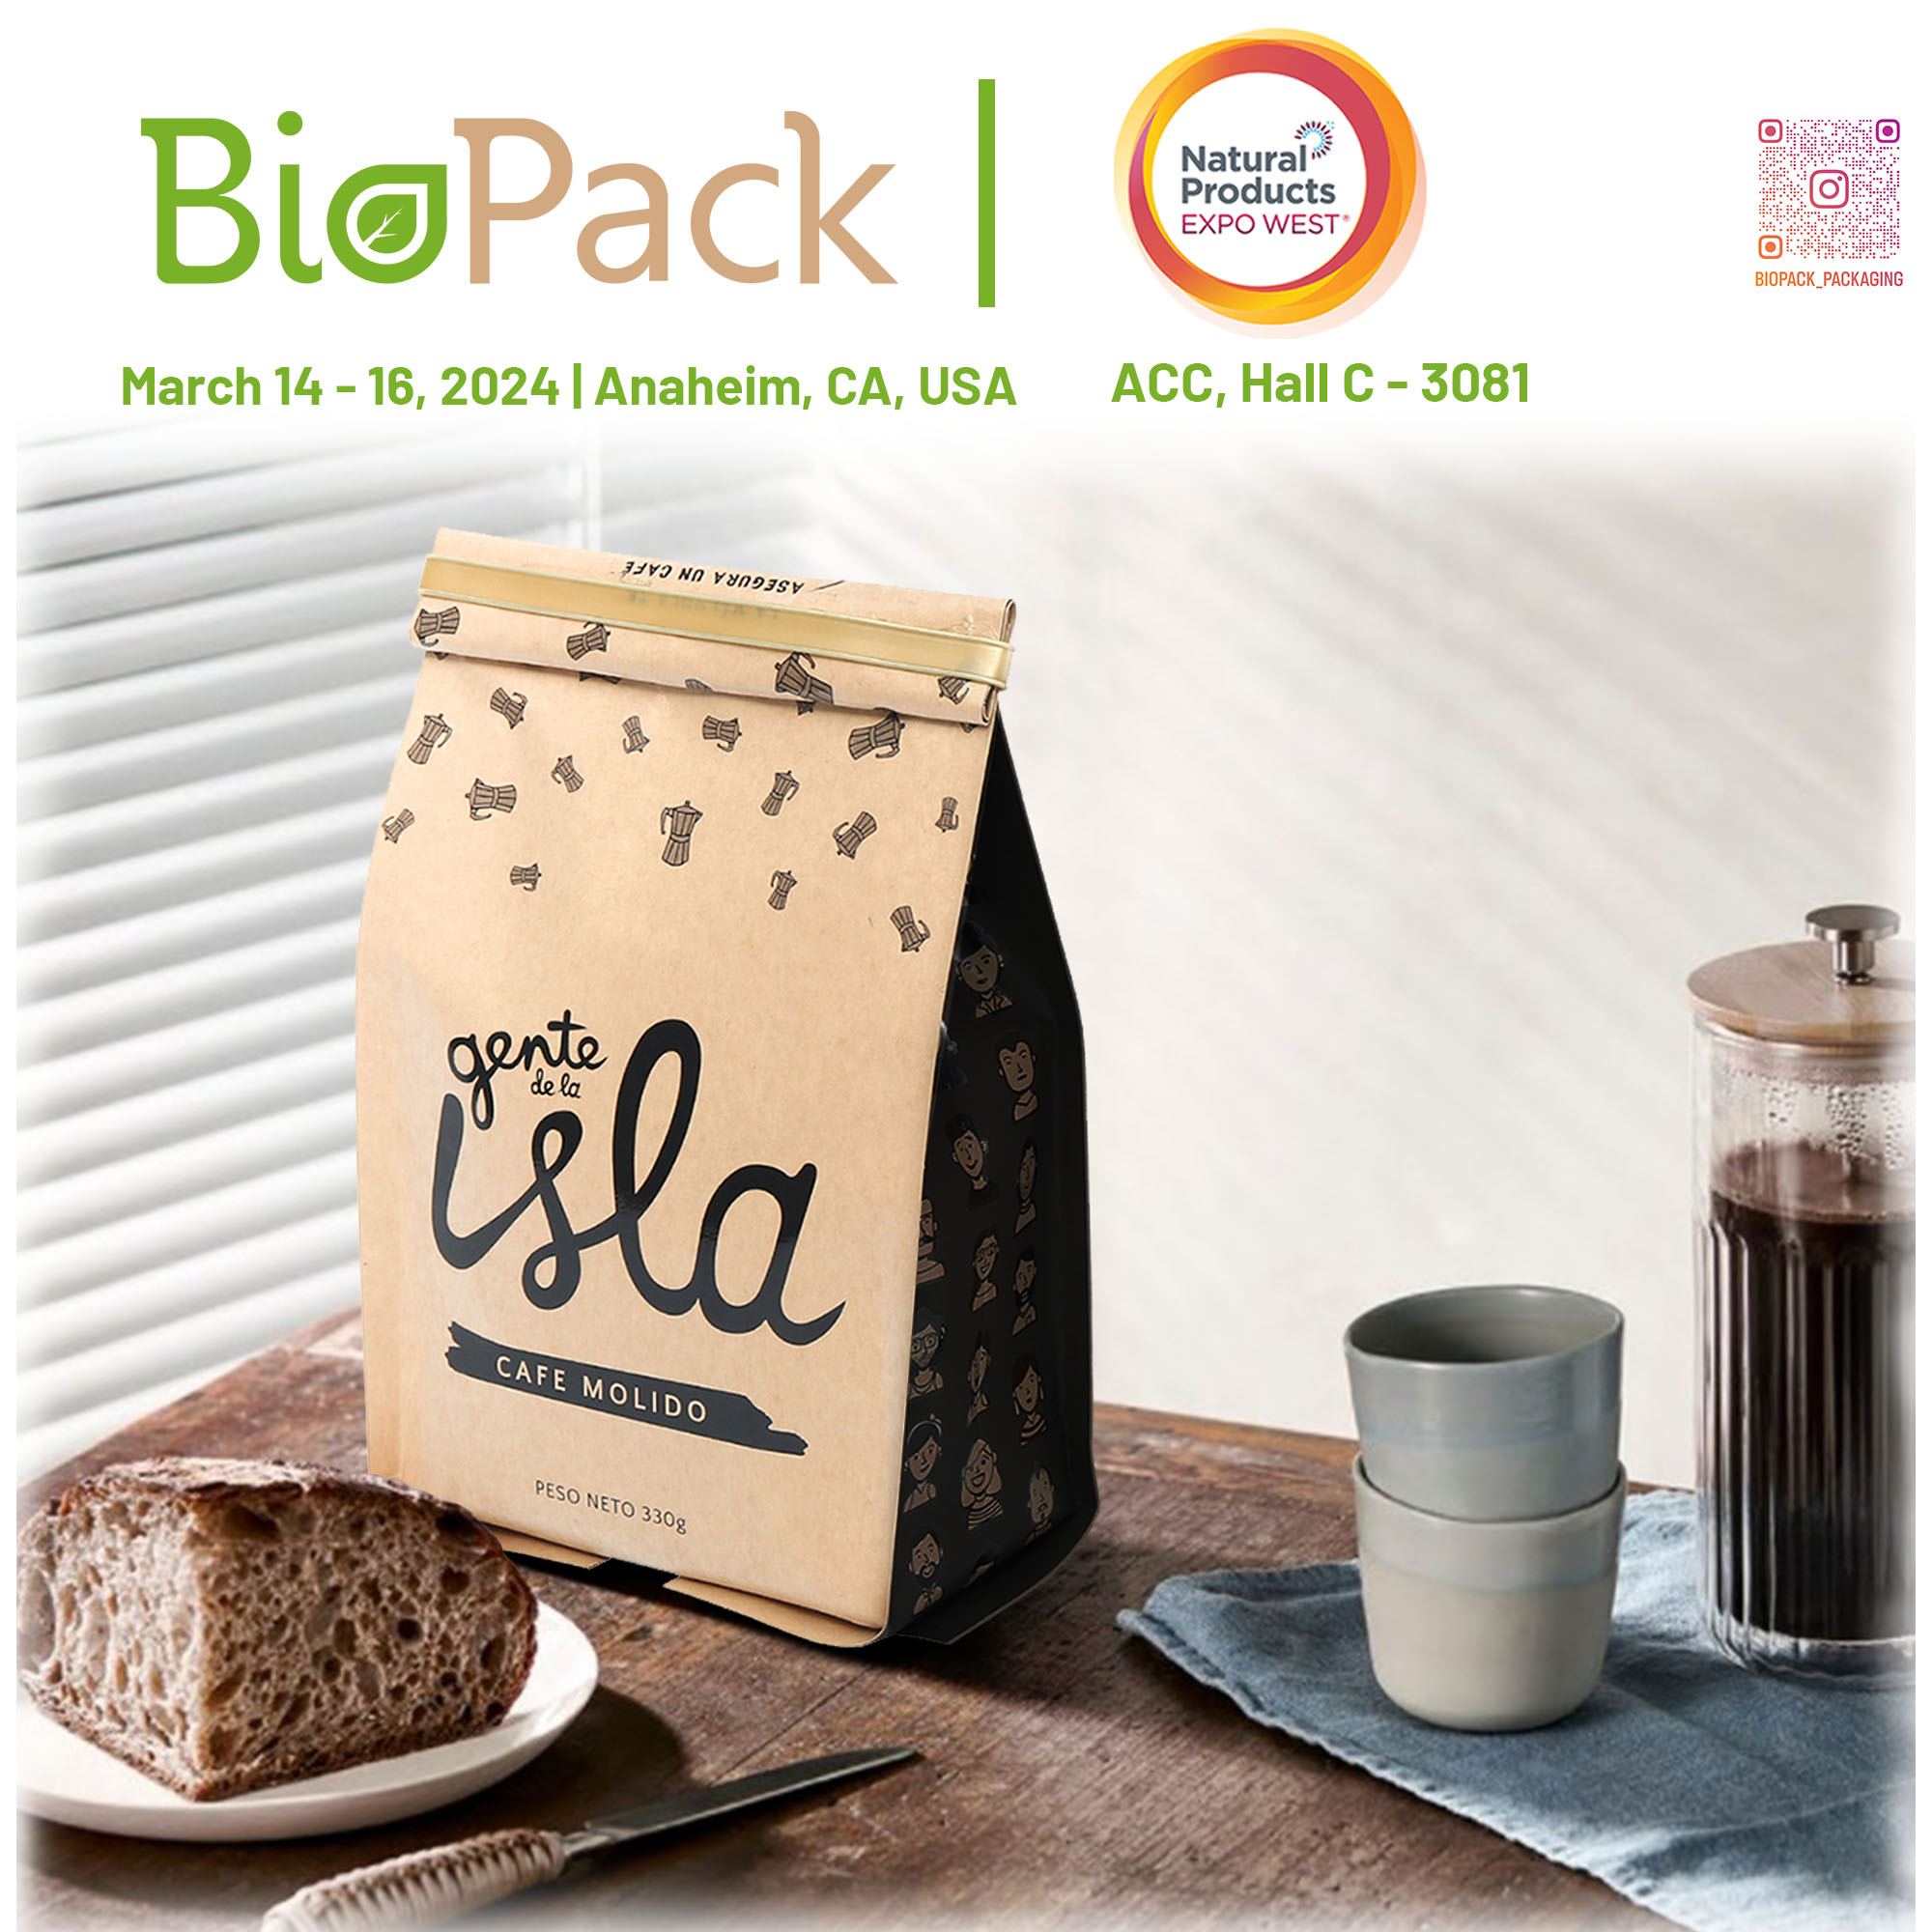 OrganicBiopack Showcases Innovative Organic Food Packaging Solutions at Natural Products Expo West 2024